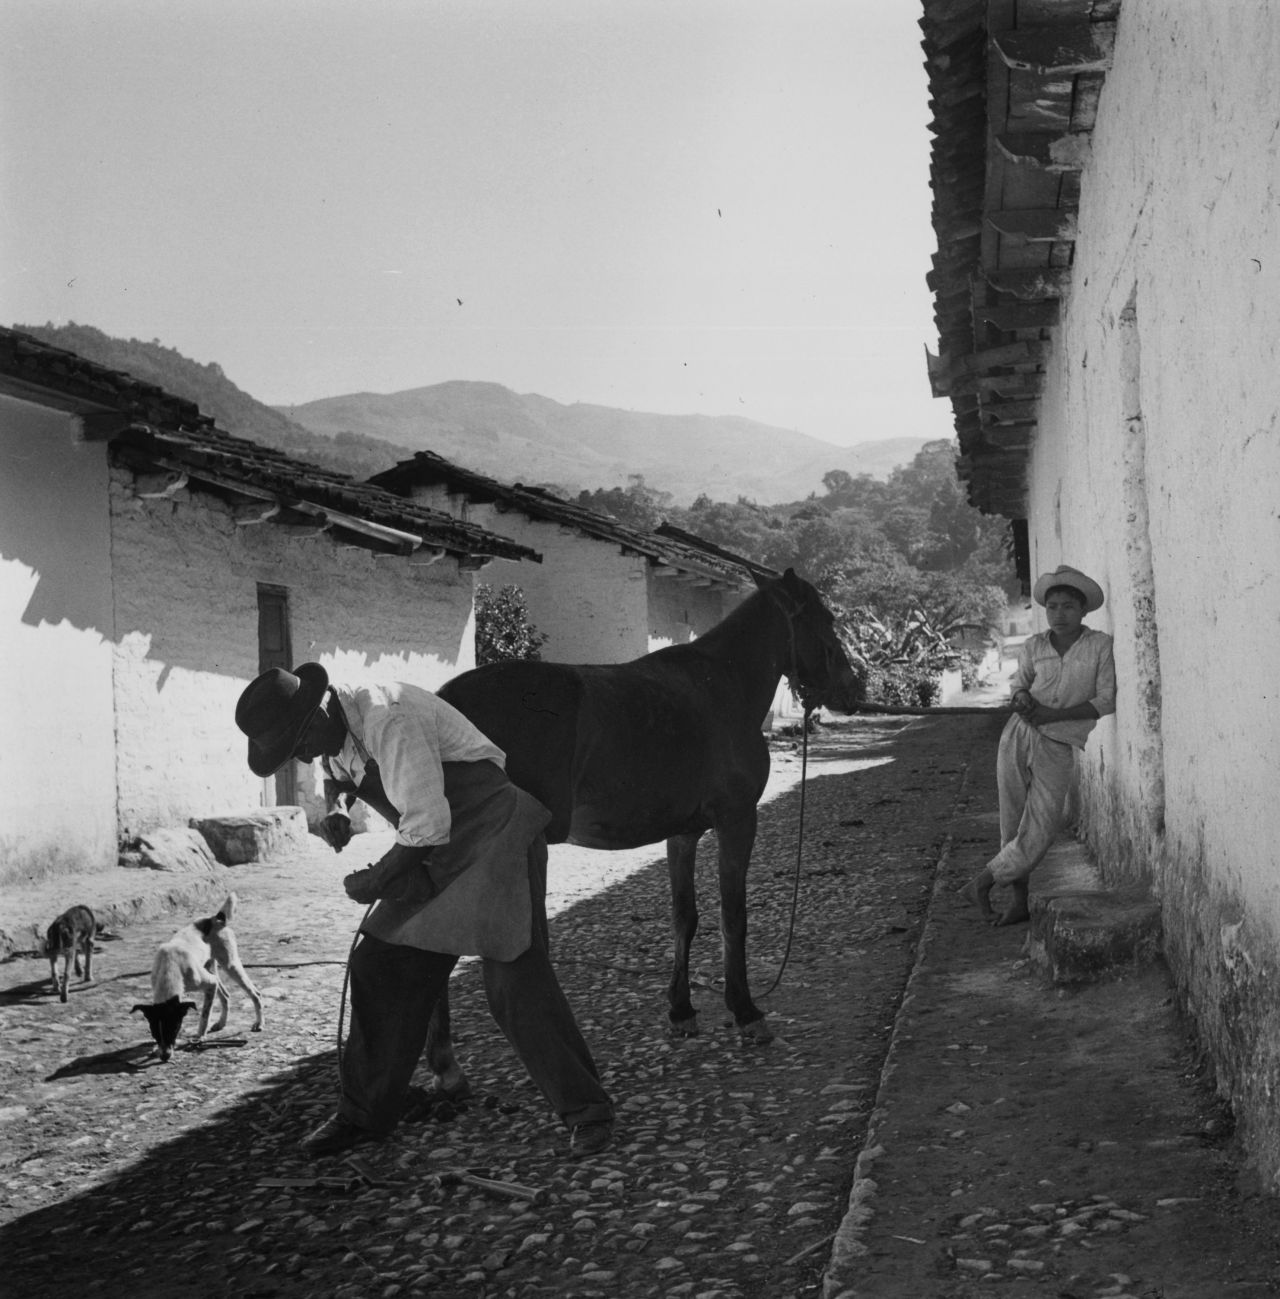 Farriery has been an occupation, and an art, for thousands of years, incorporating the skills of a blacksmith with elements of horsemanship. This photo shows a farrier at work in a Guatemalan mountain village in the 1950s. 